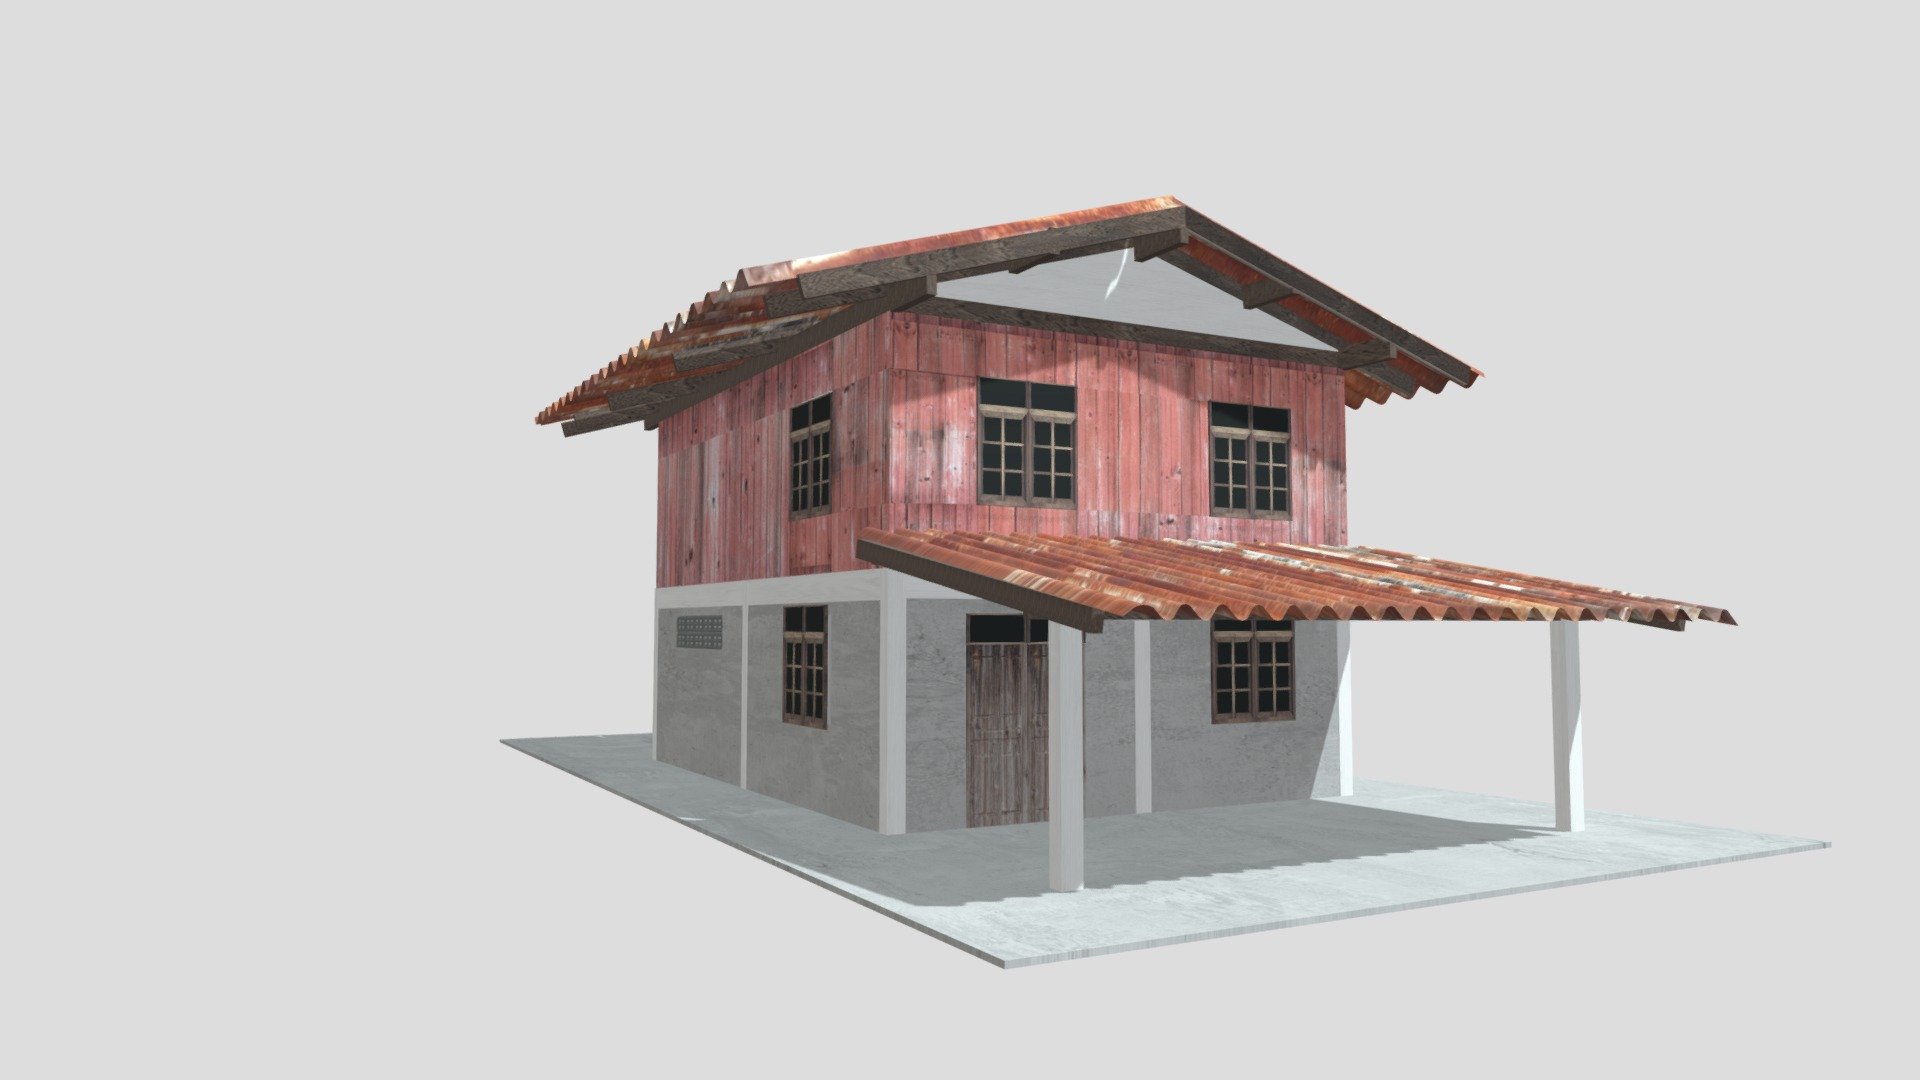 Thai house
Used in animation or various works - Thai House - 3D model by PleumRCBY (@pleum.rcby) 3d model